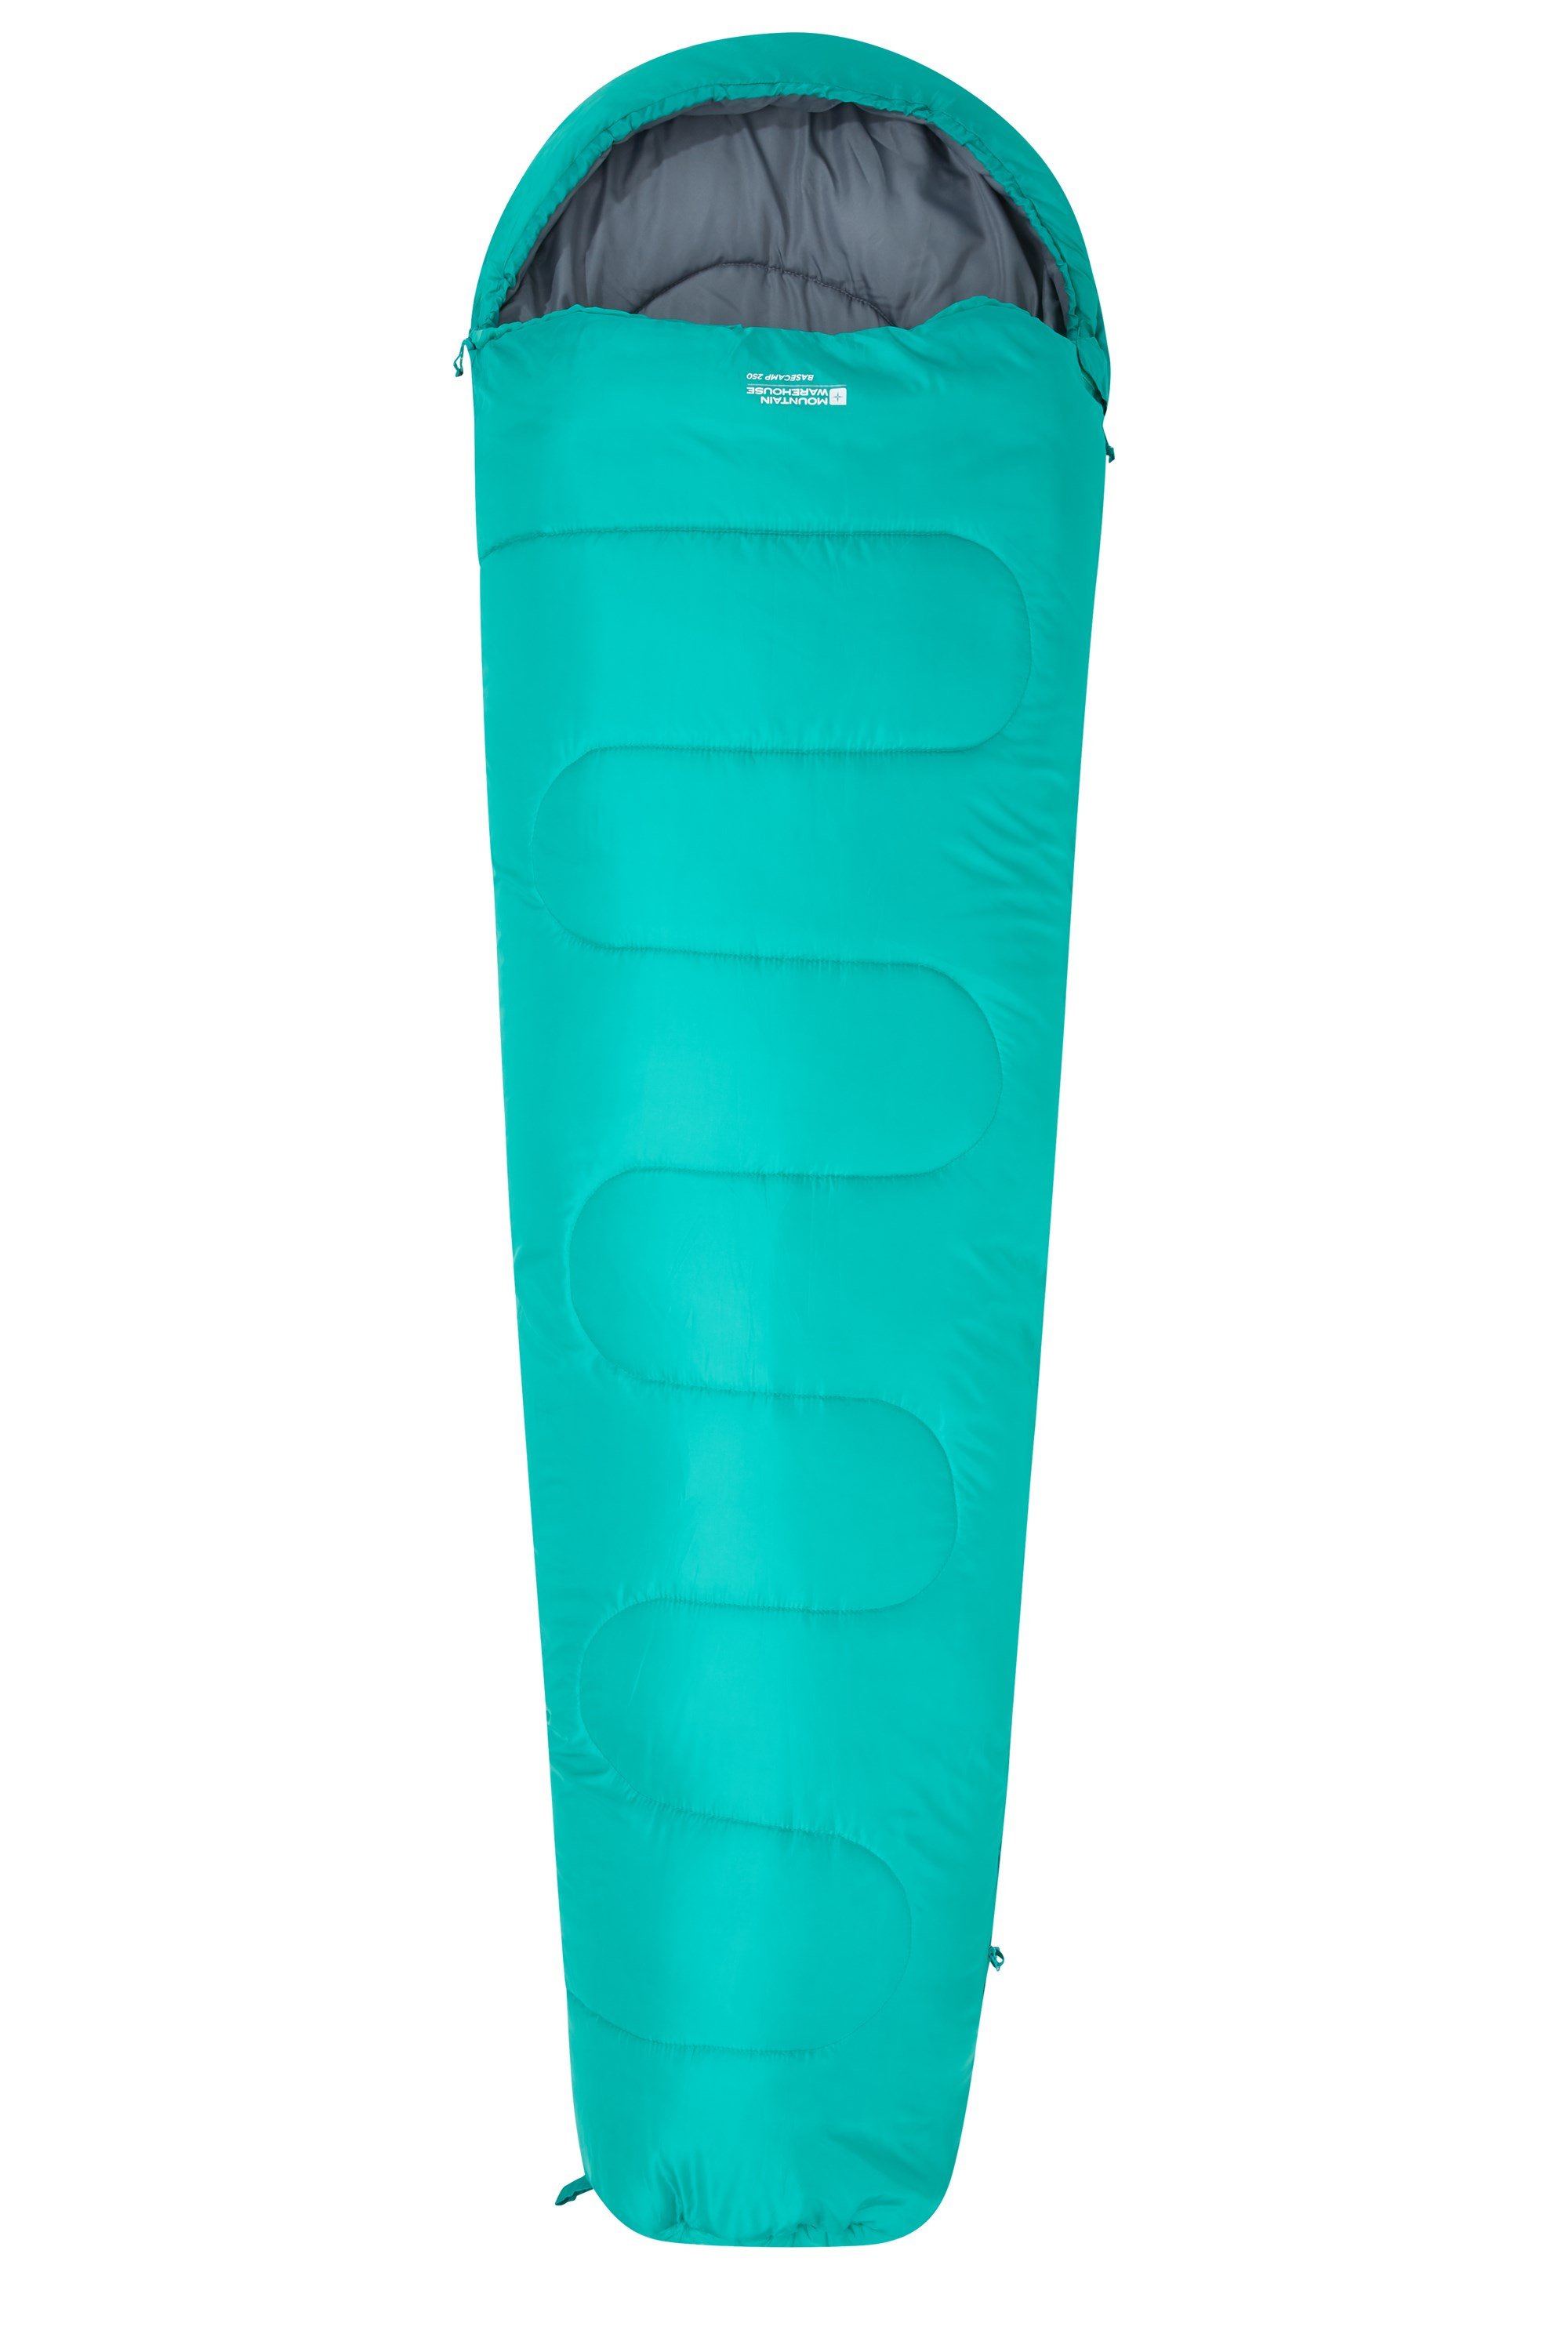 x 75cm 185cm warm nights summer wei w l for this sleeping bag its 15°C to 5°C Hollow fibre insulation Great For Summer Nights Mountain Warehouse 2 Season indoor use Comfort Temperature Ideal for warm weather camping trips Dimensions 